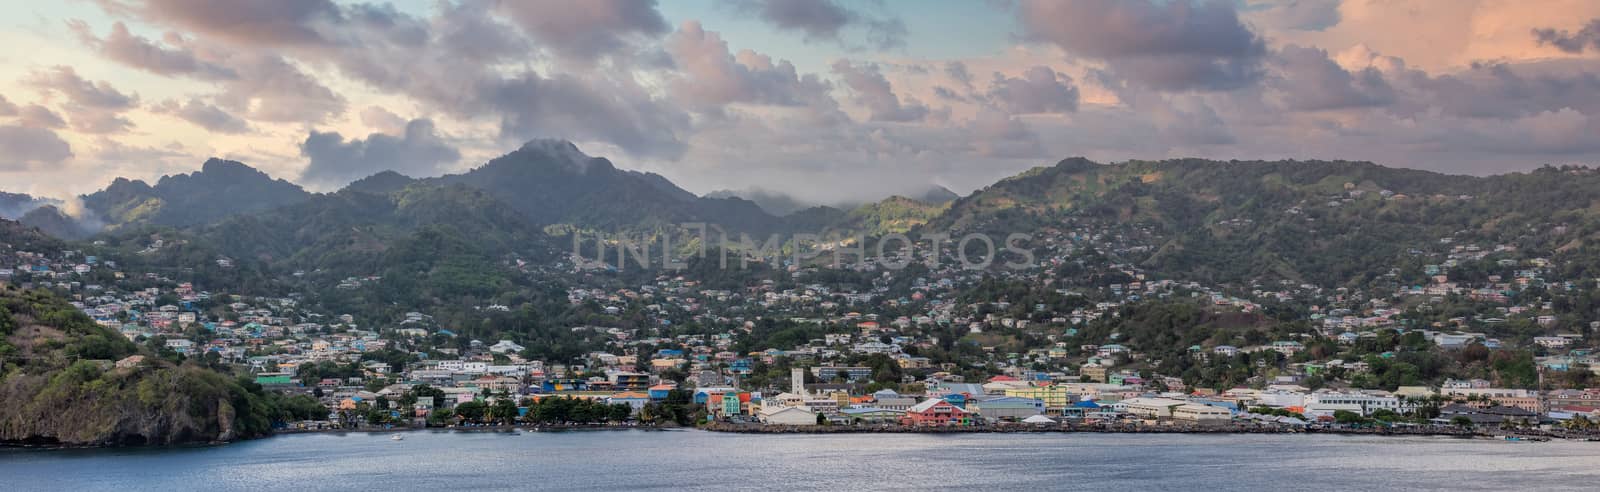 Amazing aerial panoramic landscape shot of St. Vincent island in the Caribbean Sea. Beautiful sunset clouds and mountains in the background. High angle shot.